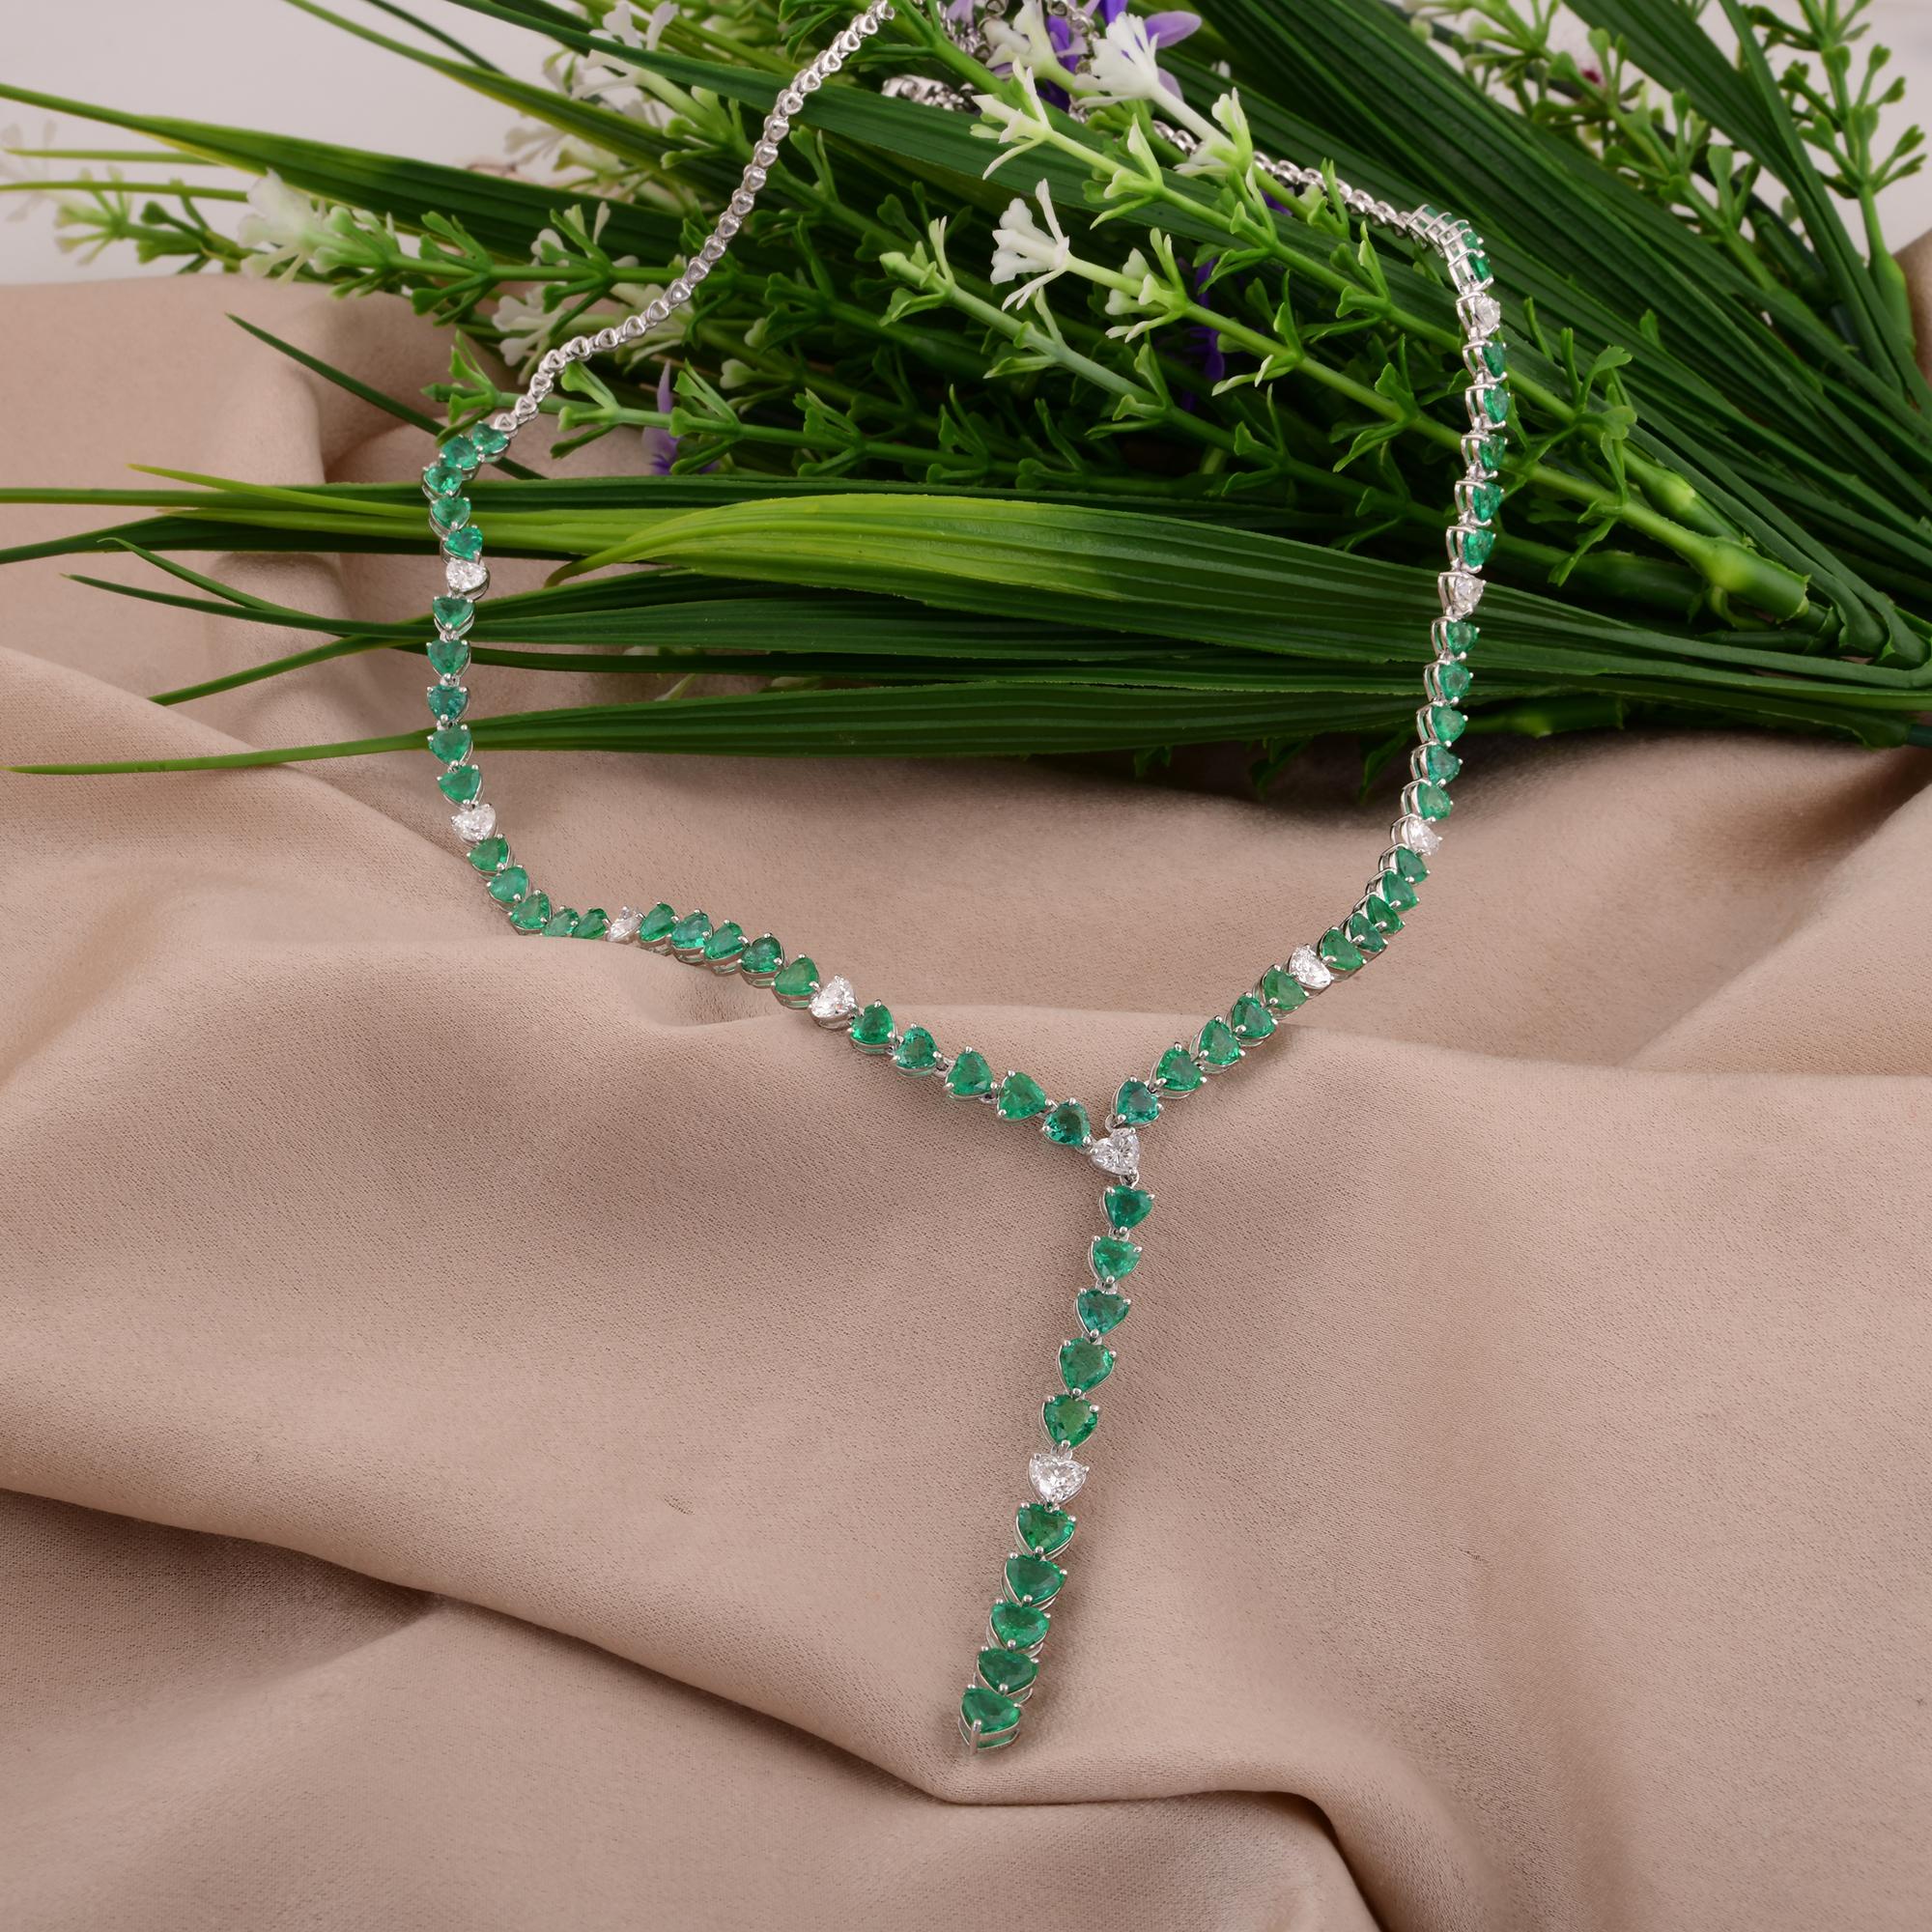 Immerse yourself in the romantic elegance of this handmade heart-shaped emerald and diamond necklace, a stunning piece of fine jewelry crafted in 14 karat white gold. At the center of the necklace lies a captivating heart-shaped emerald, renowned